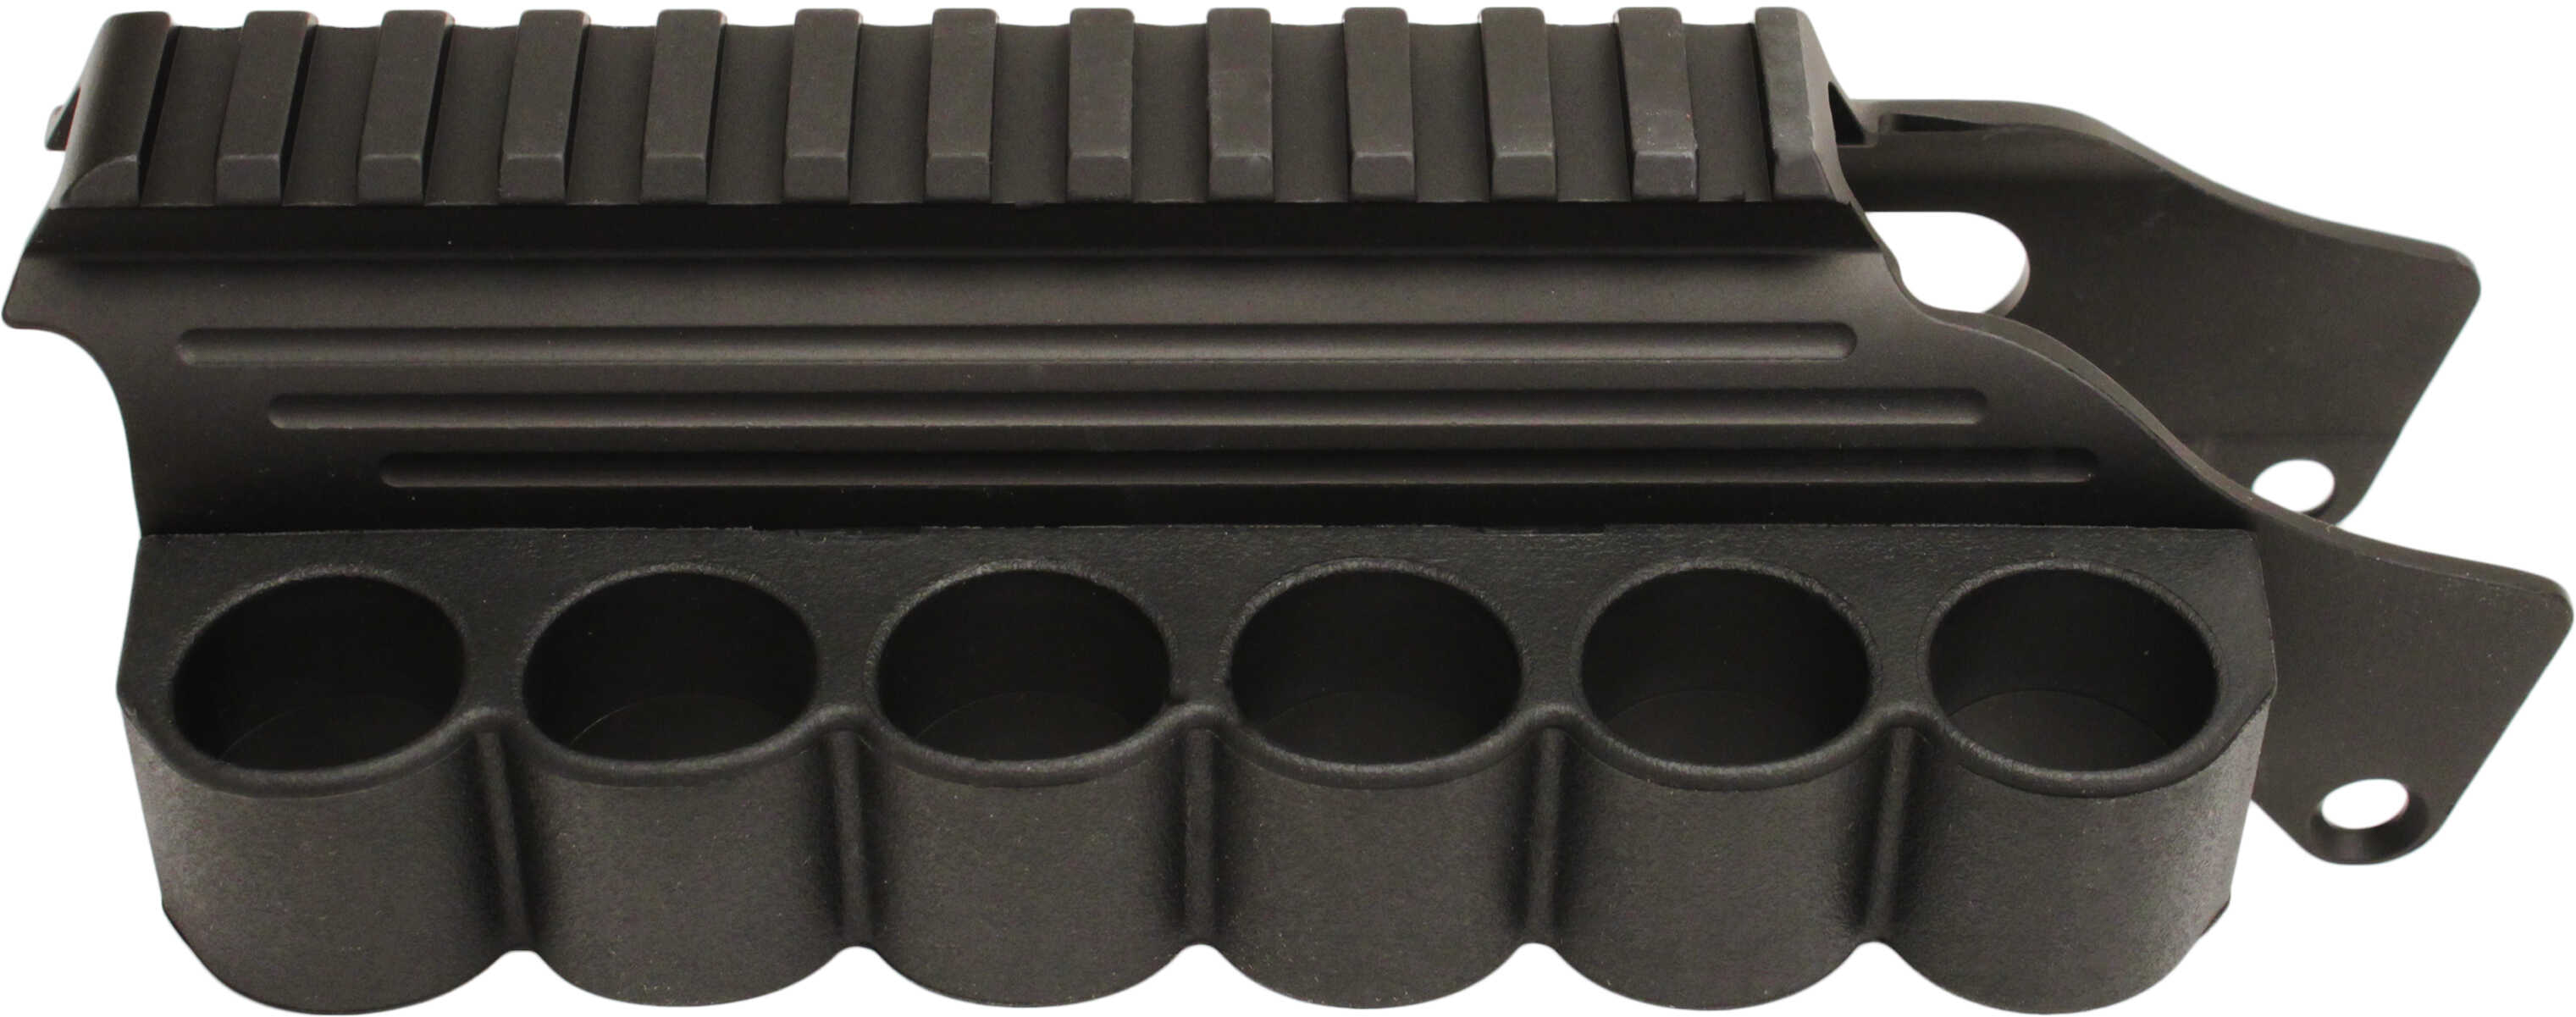 TacStar Shotgun SideSaddle Shell Carrier with Rail Fits Mossberg 500 Black Finish